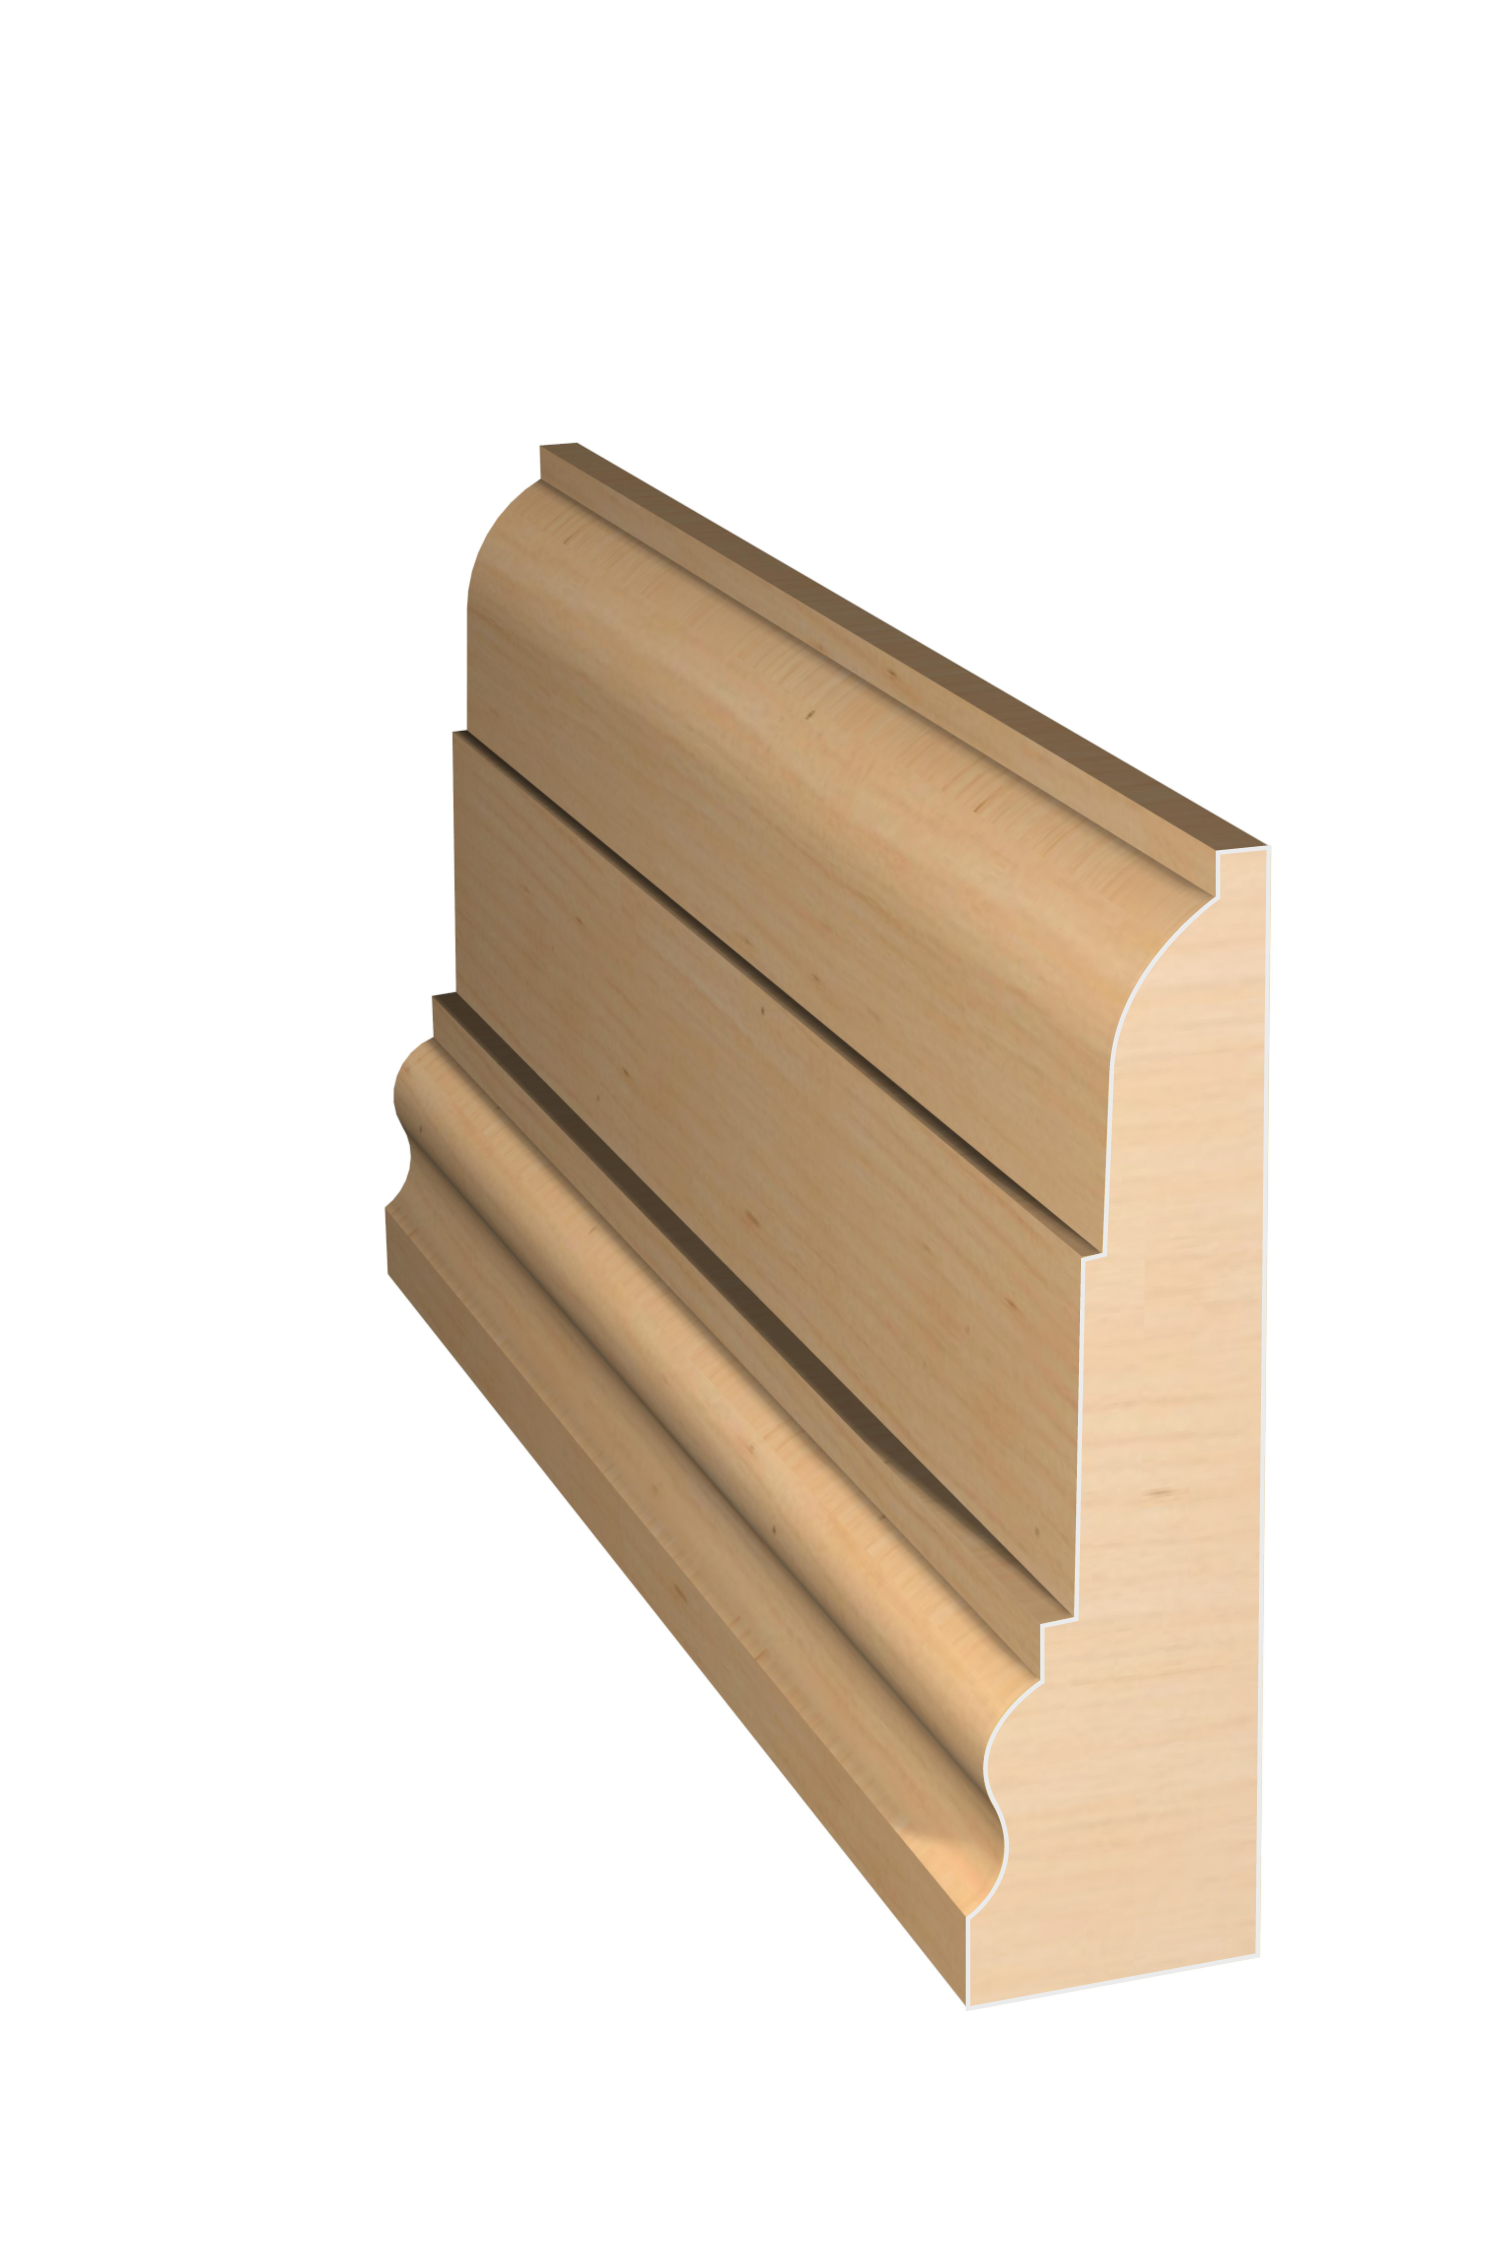 Three dimensional rendering of custom casing wood molding CAPL311 made by Public Lumber Company in Detroit.